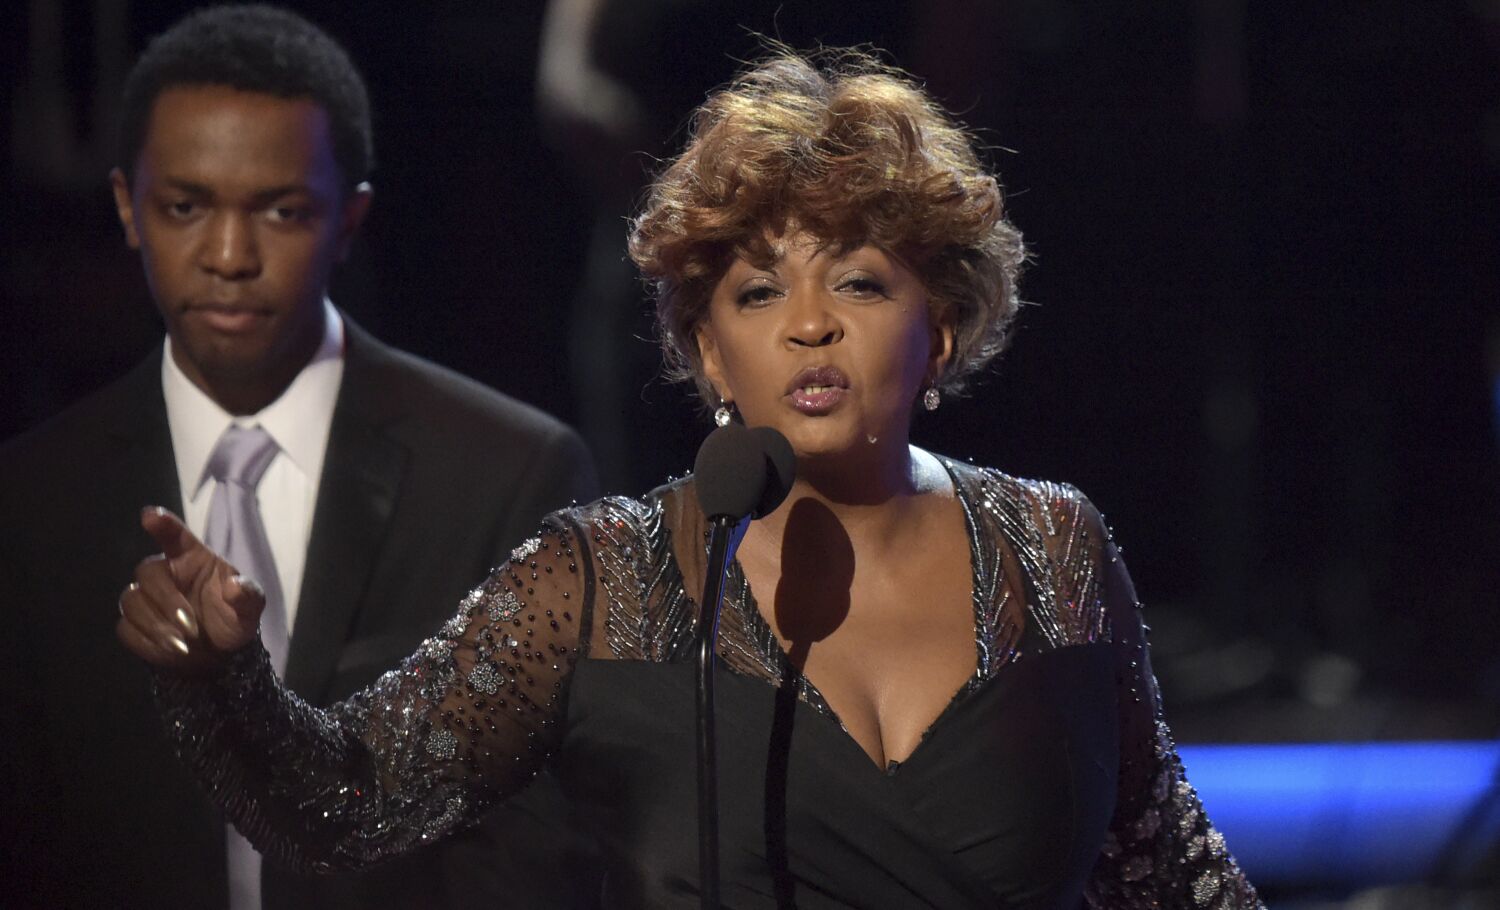 Anita Baker fans rapturous over the songstress' new tour (and it has a stop in L.A.)